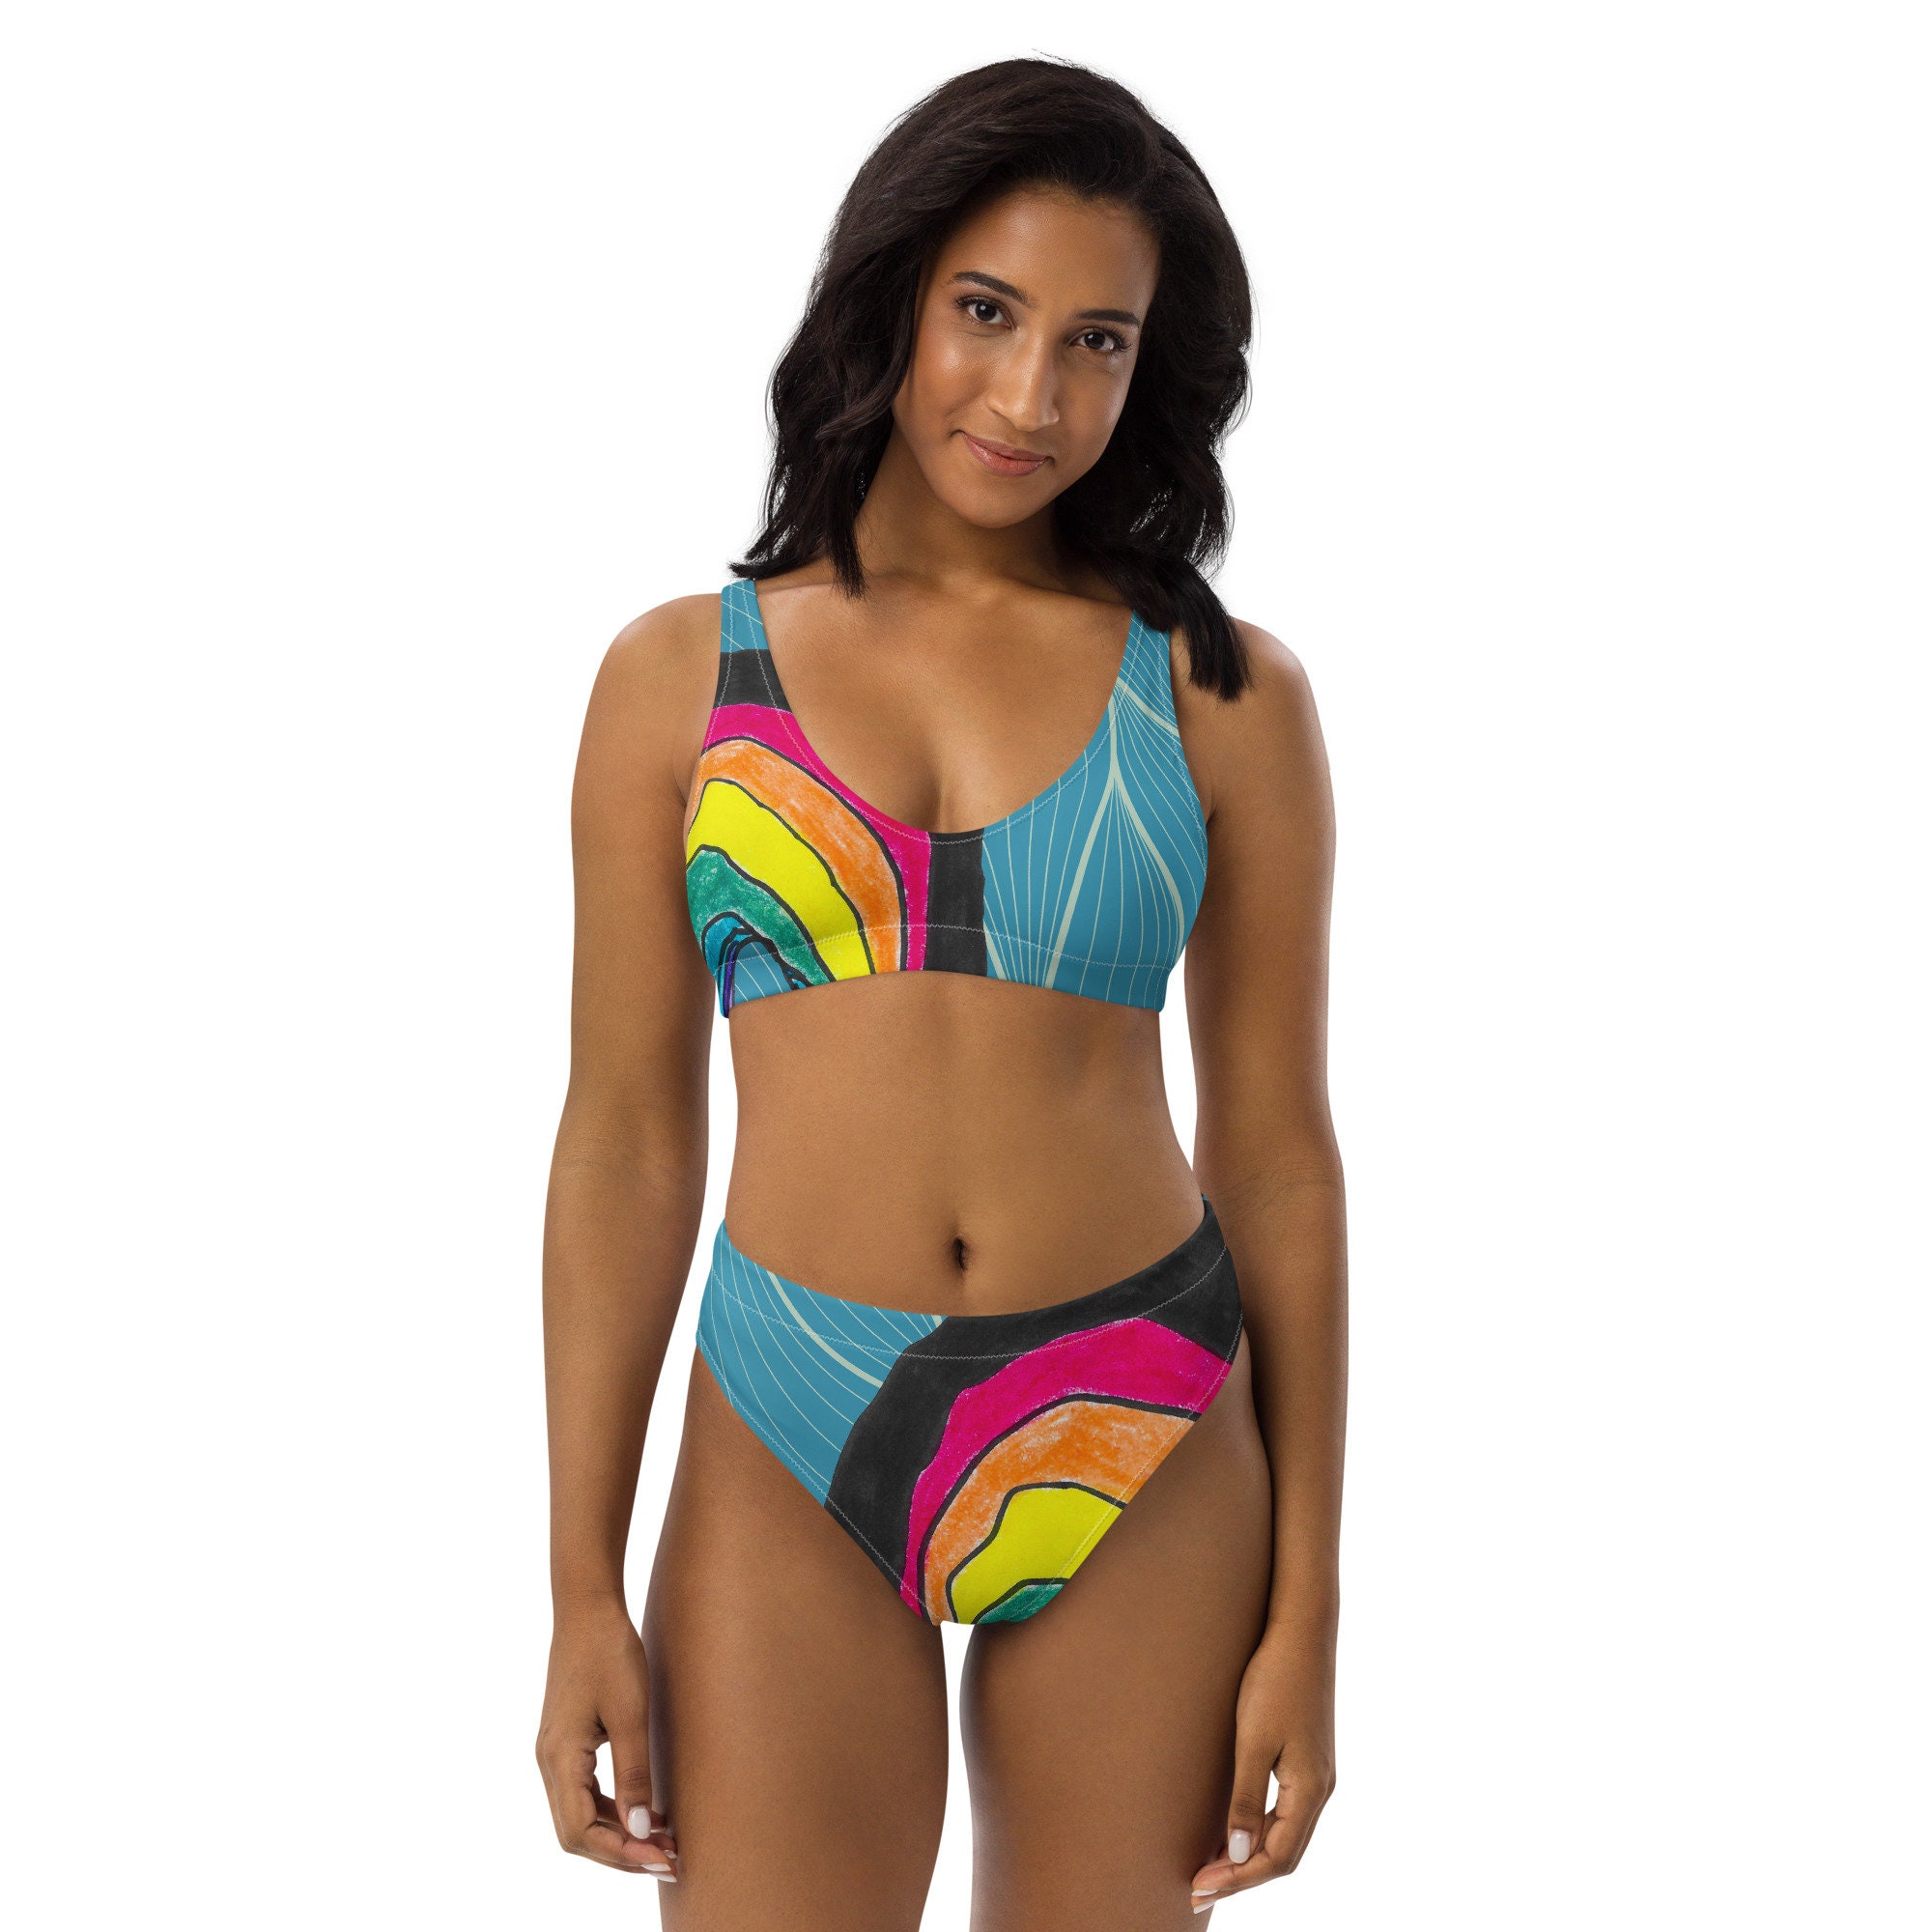 bikinis for teenagers, bikinis for teenagers Suppliers and Manufacturers at